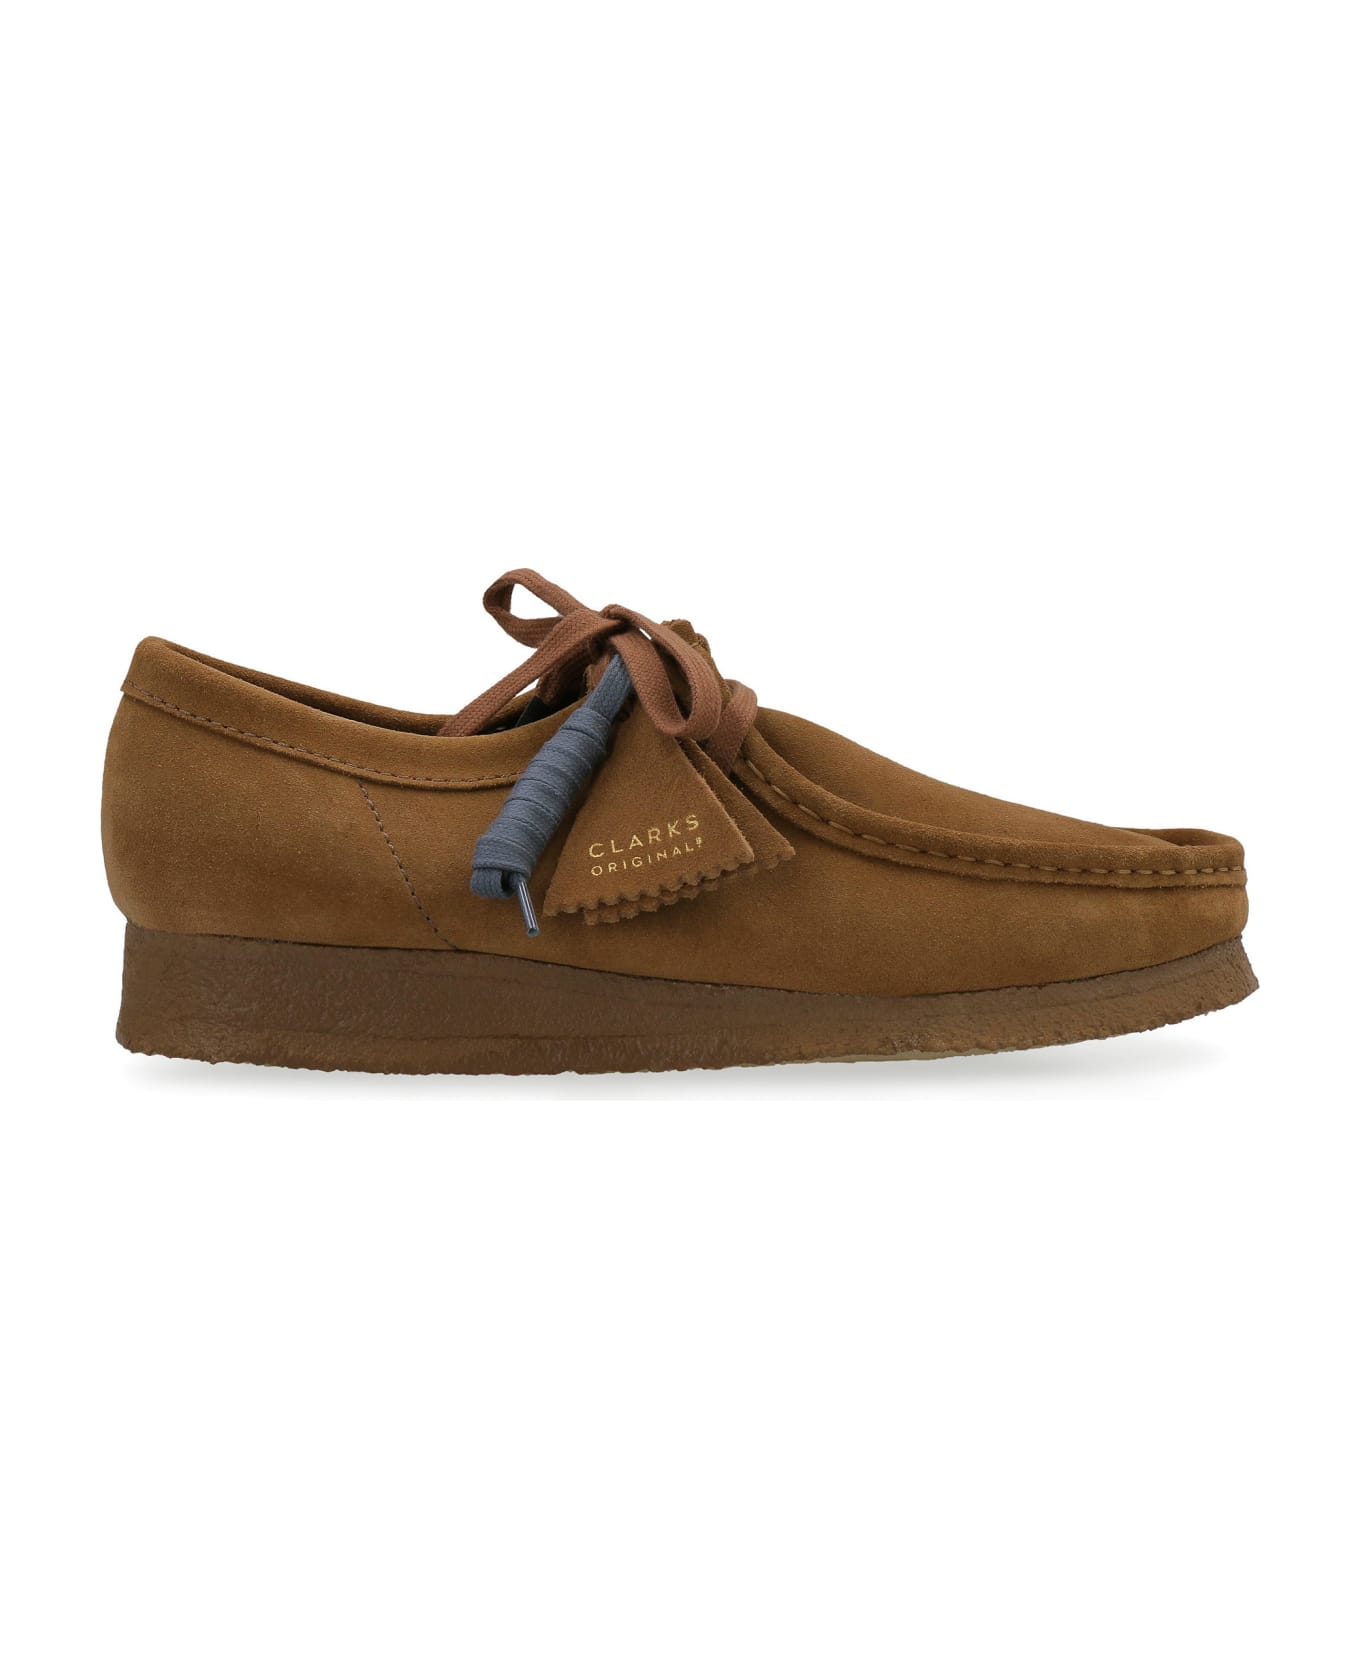 Clarks Wallabee Suede Lace-up Shoes - Saddle Brown